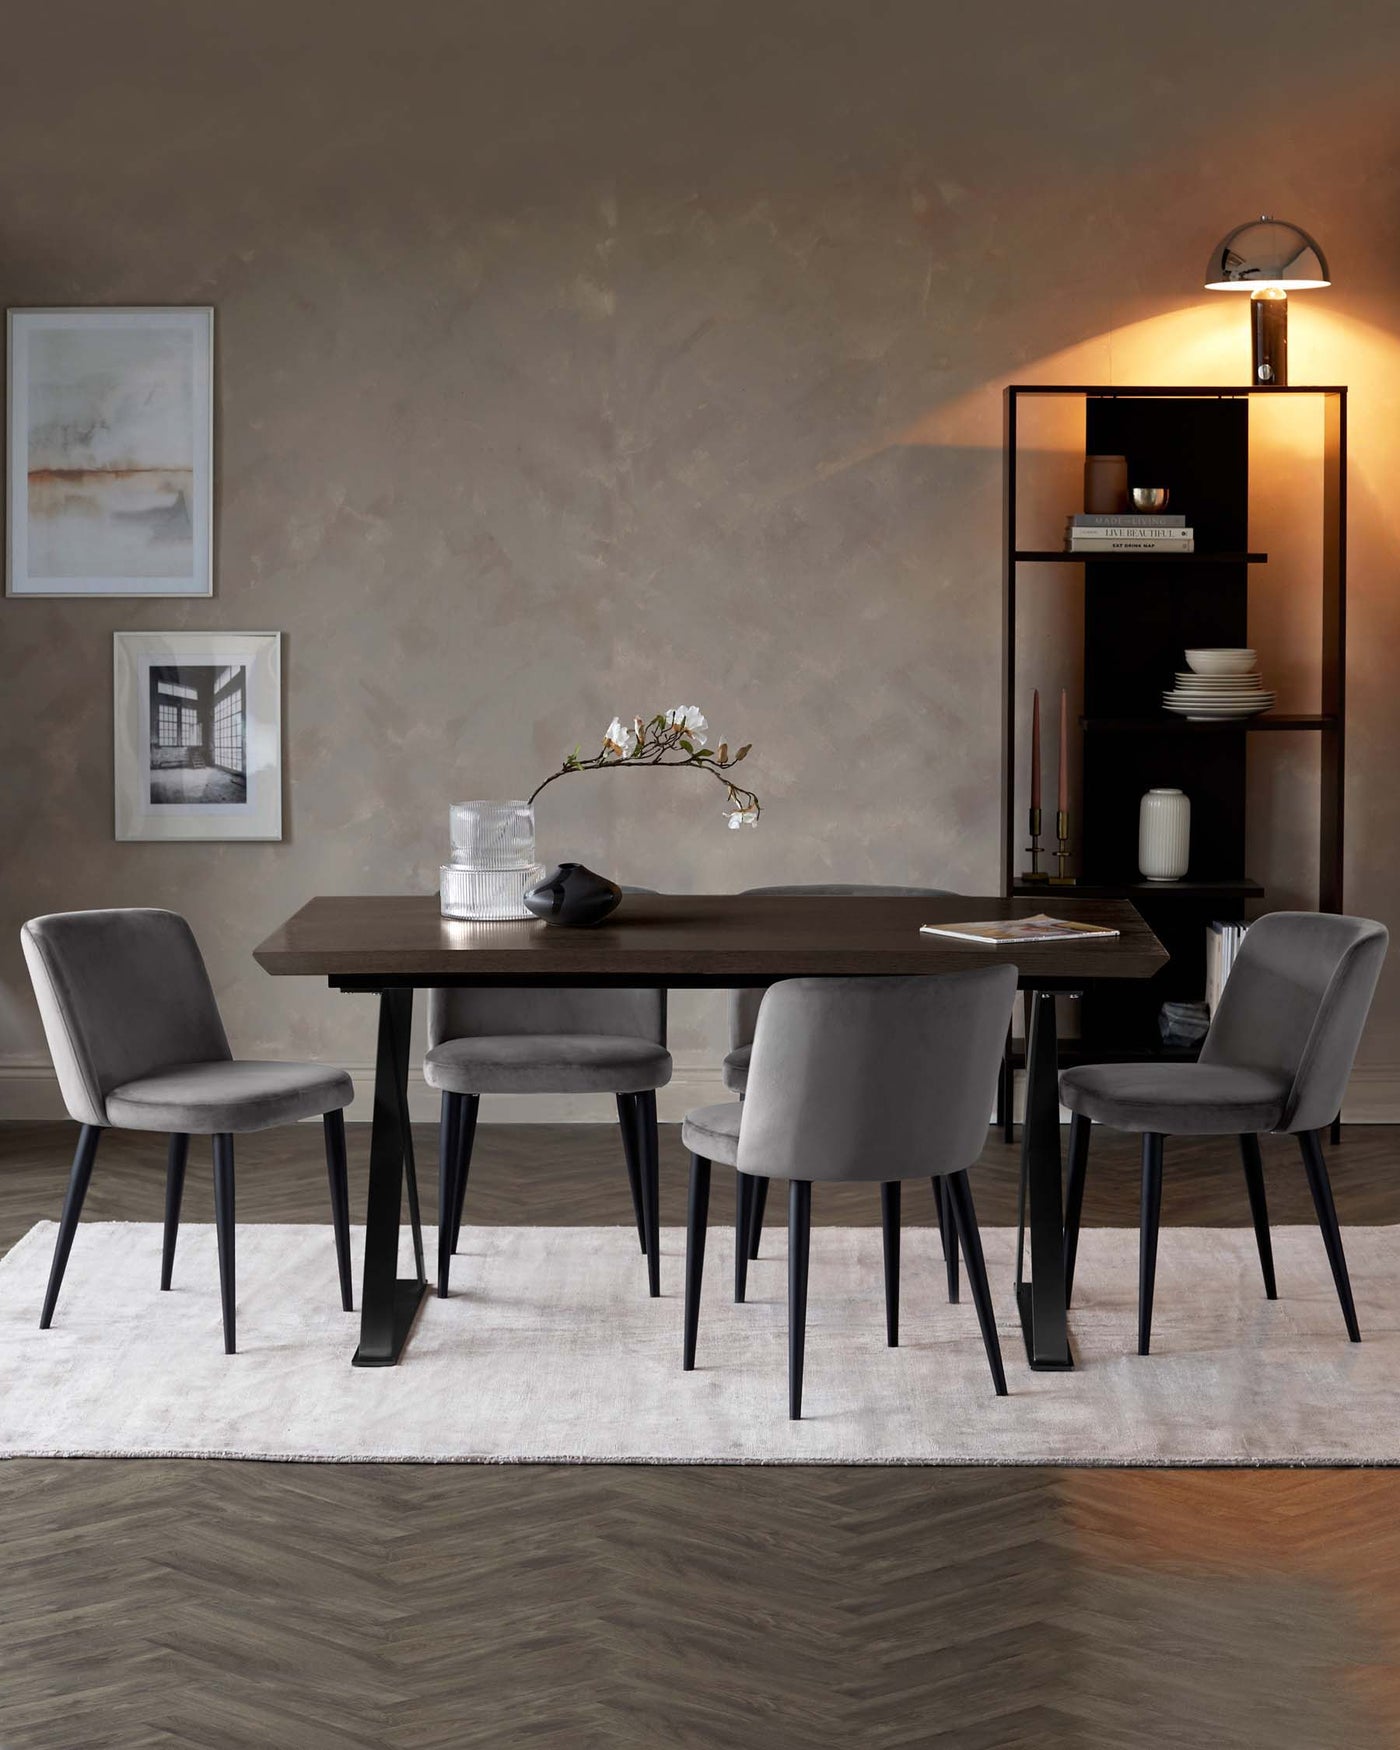 Contemporary dining room furniture featuring a dark wood table with angled black legs, paired with four plush, upholstered chairs in a light grey fabric and black slender legs. In the background, a black shelving unit with varying compartment sizes displays decorative items and books, illuminated by a stylish arching floor lamp with a chrome finish. The setting is complemented by a neutral rug under the table and chairs.